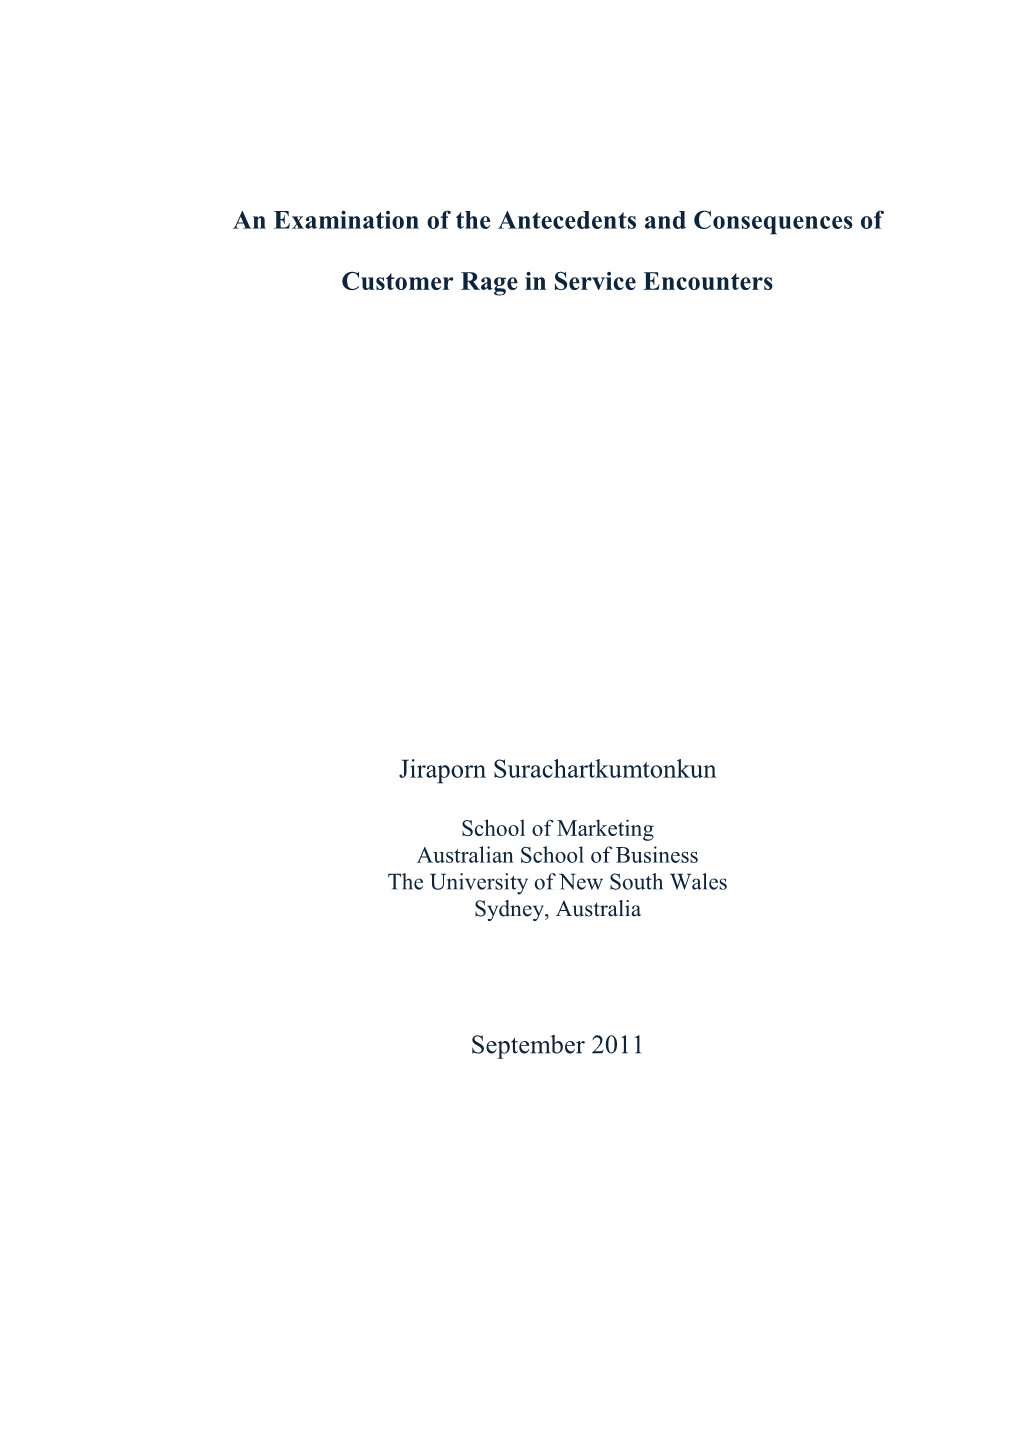 An Examination of the Antecedents and Consequences of Customer